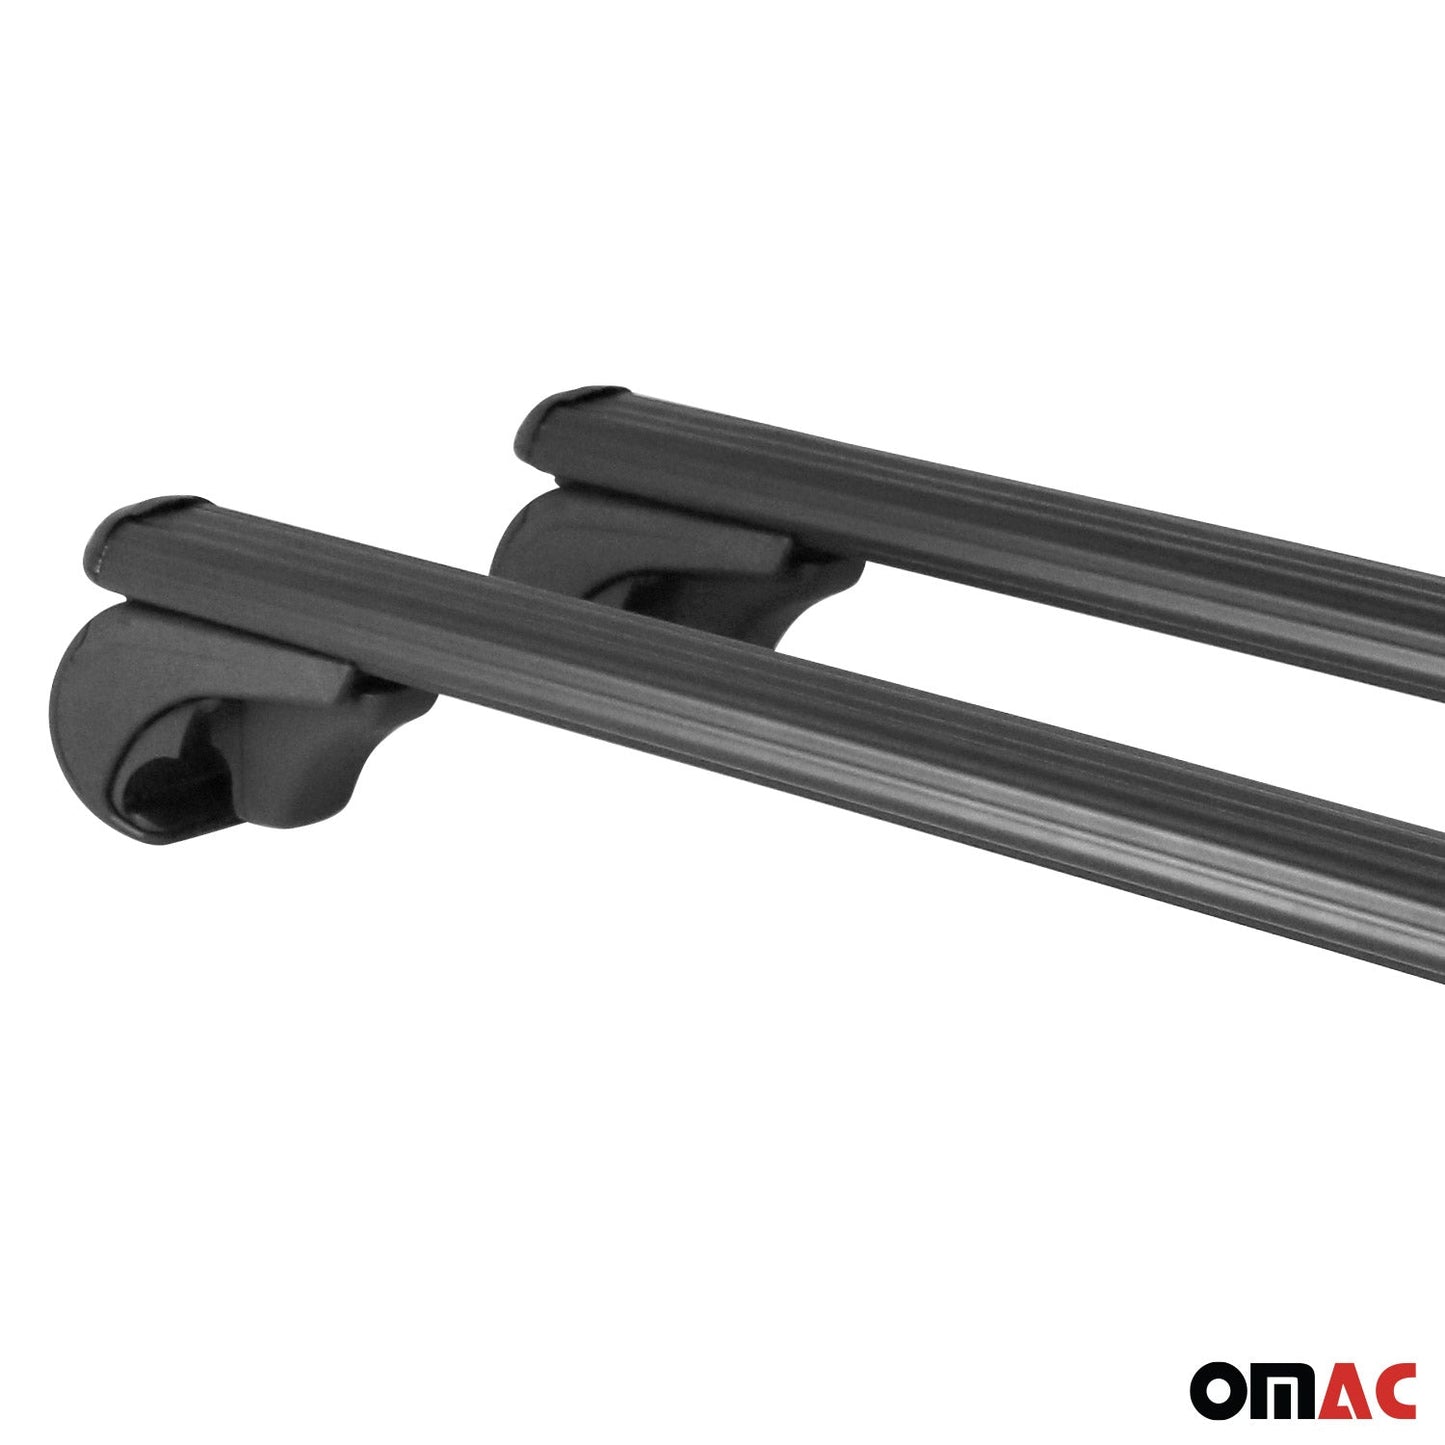 OMAC Roof Rack Cross Bars Luggage Carrier Black for BMW 3 Series 335i 2007-2010 12169696929MB